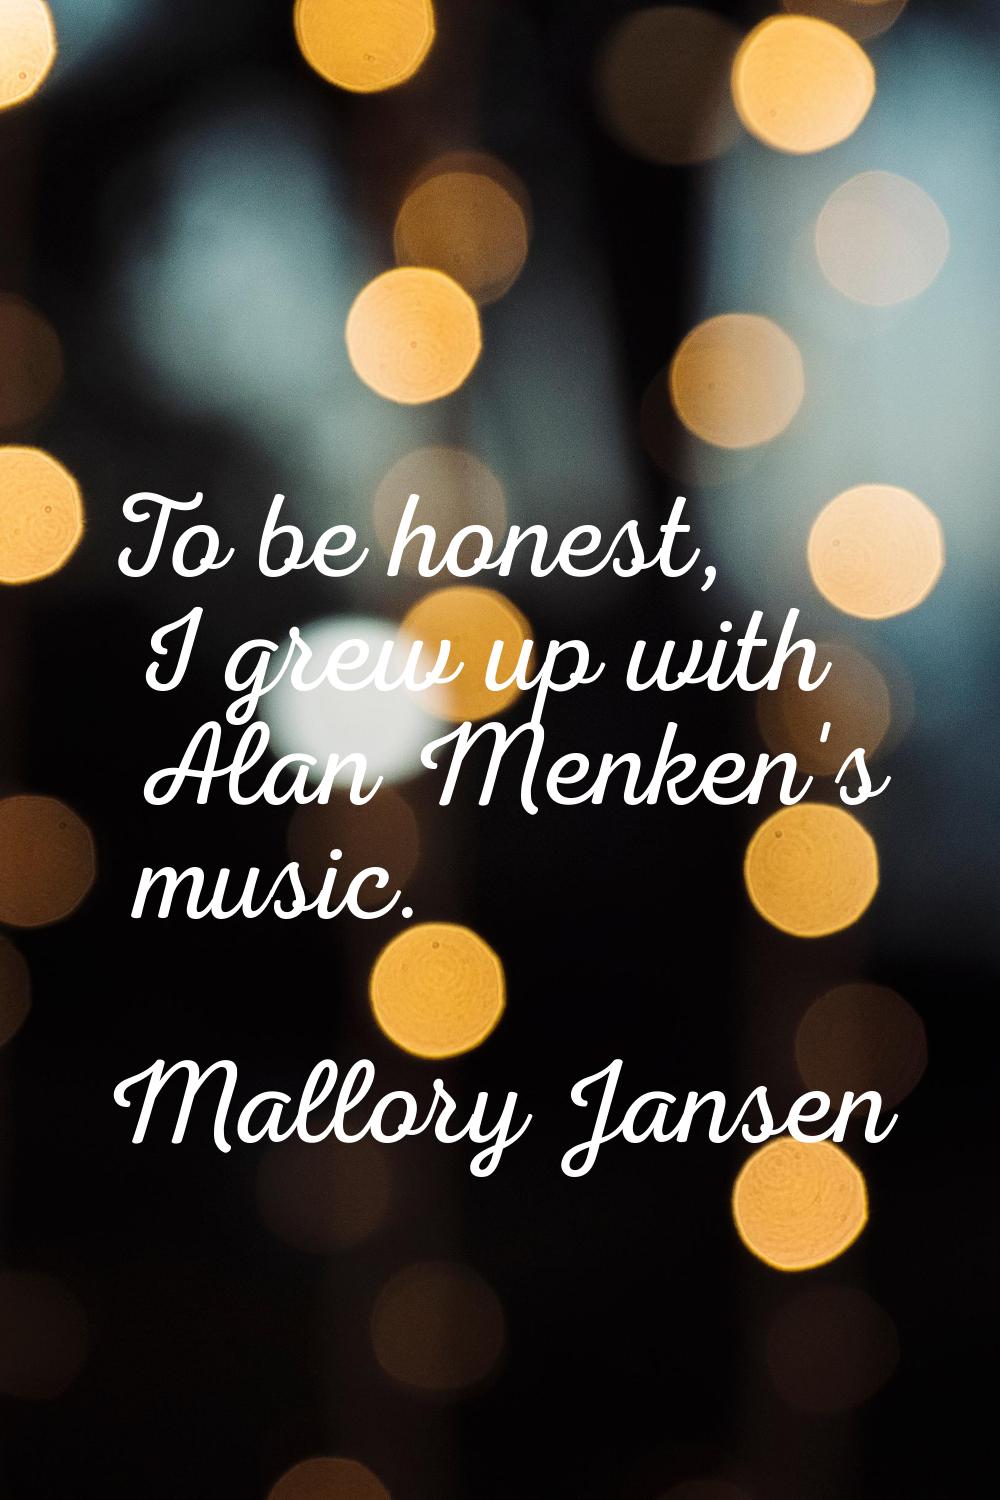 To be honest, I grew up with Alan Menken's music.